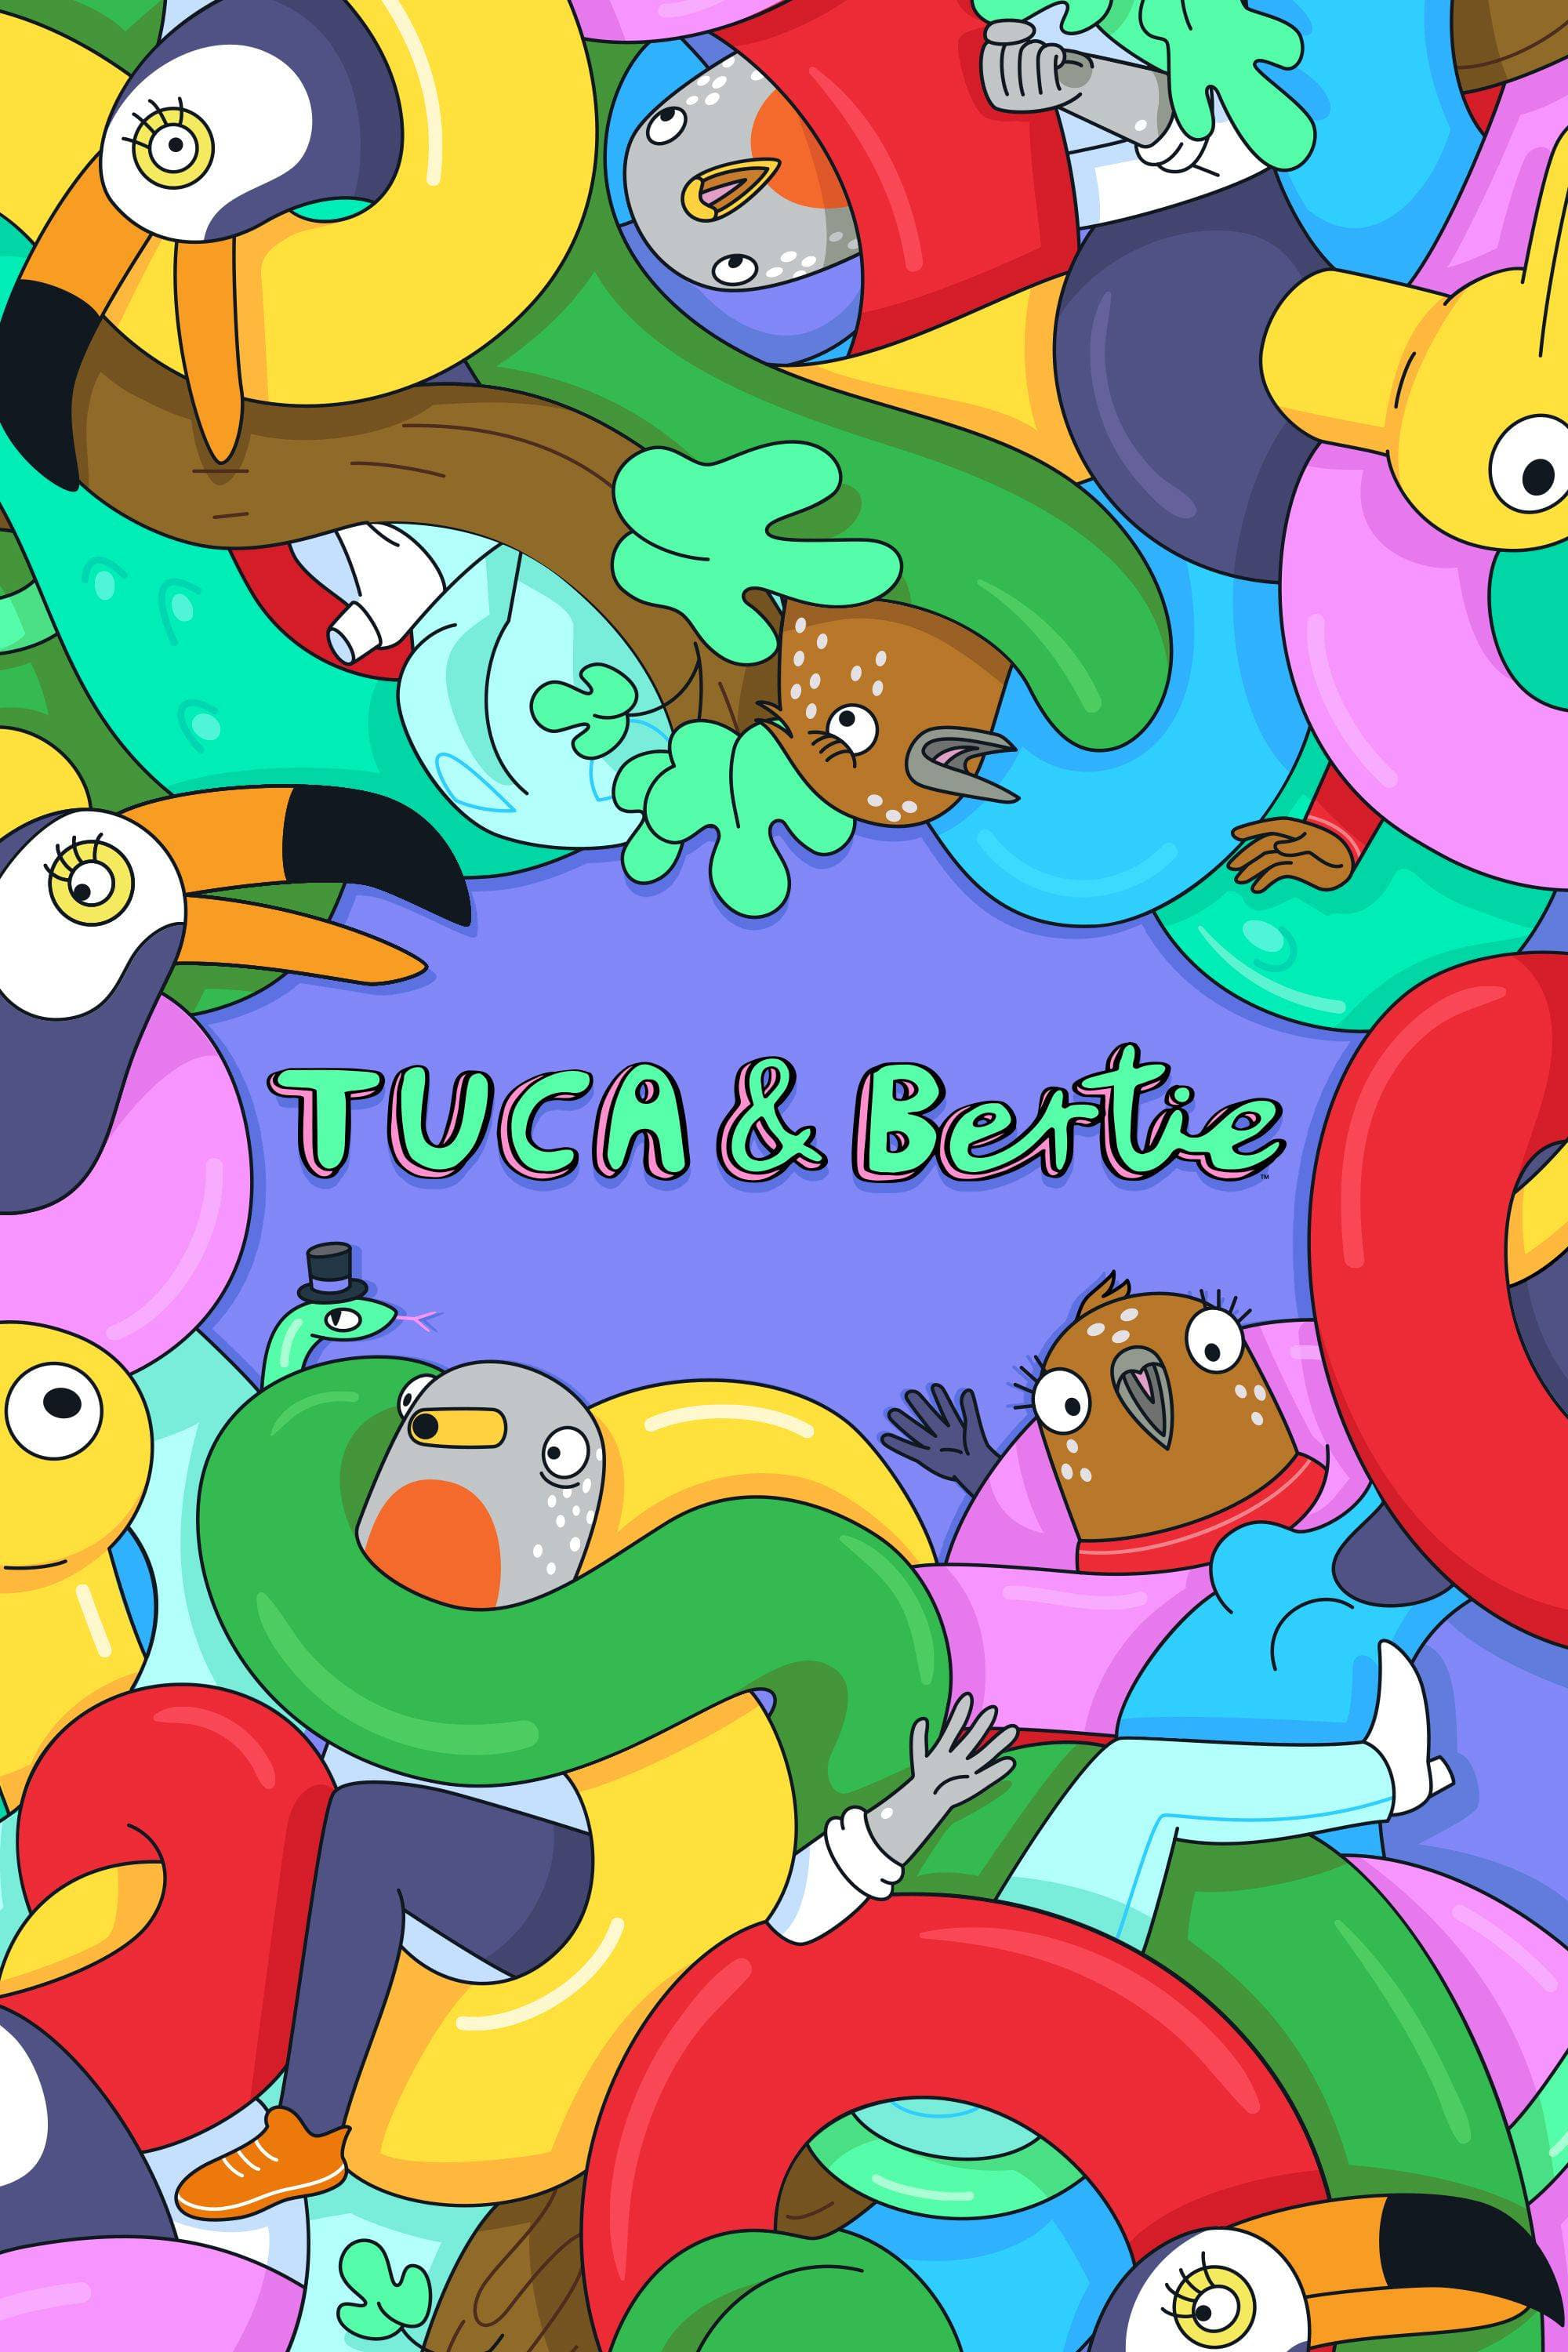 Tuca & Bertie TV Shows About Surreal